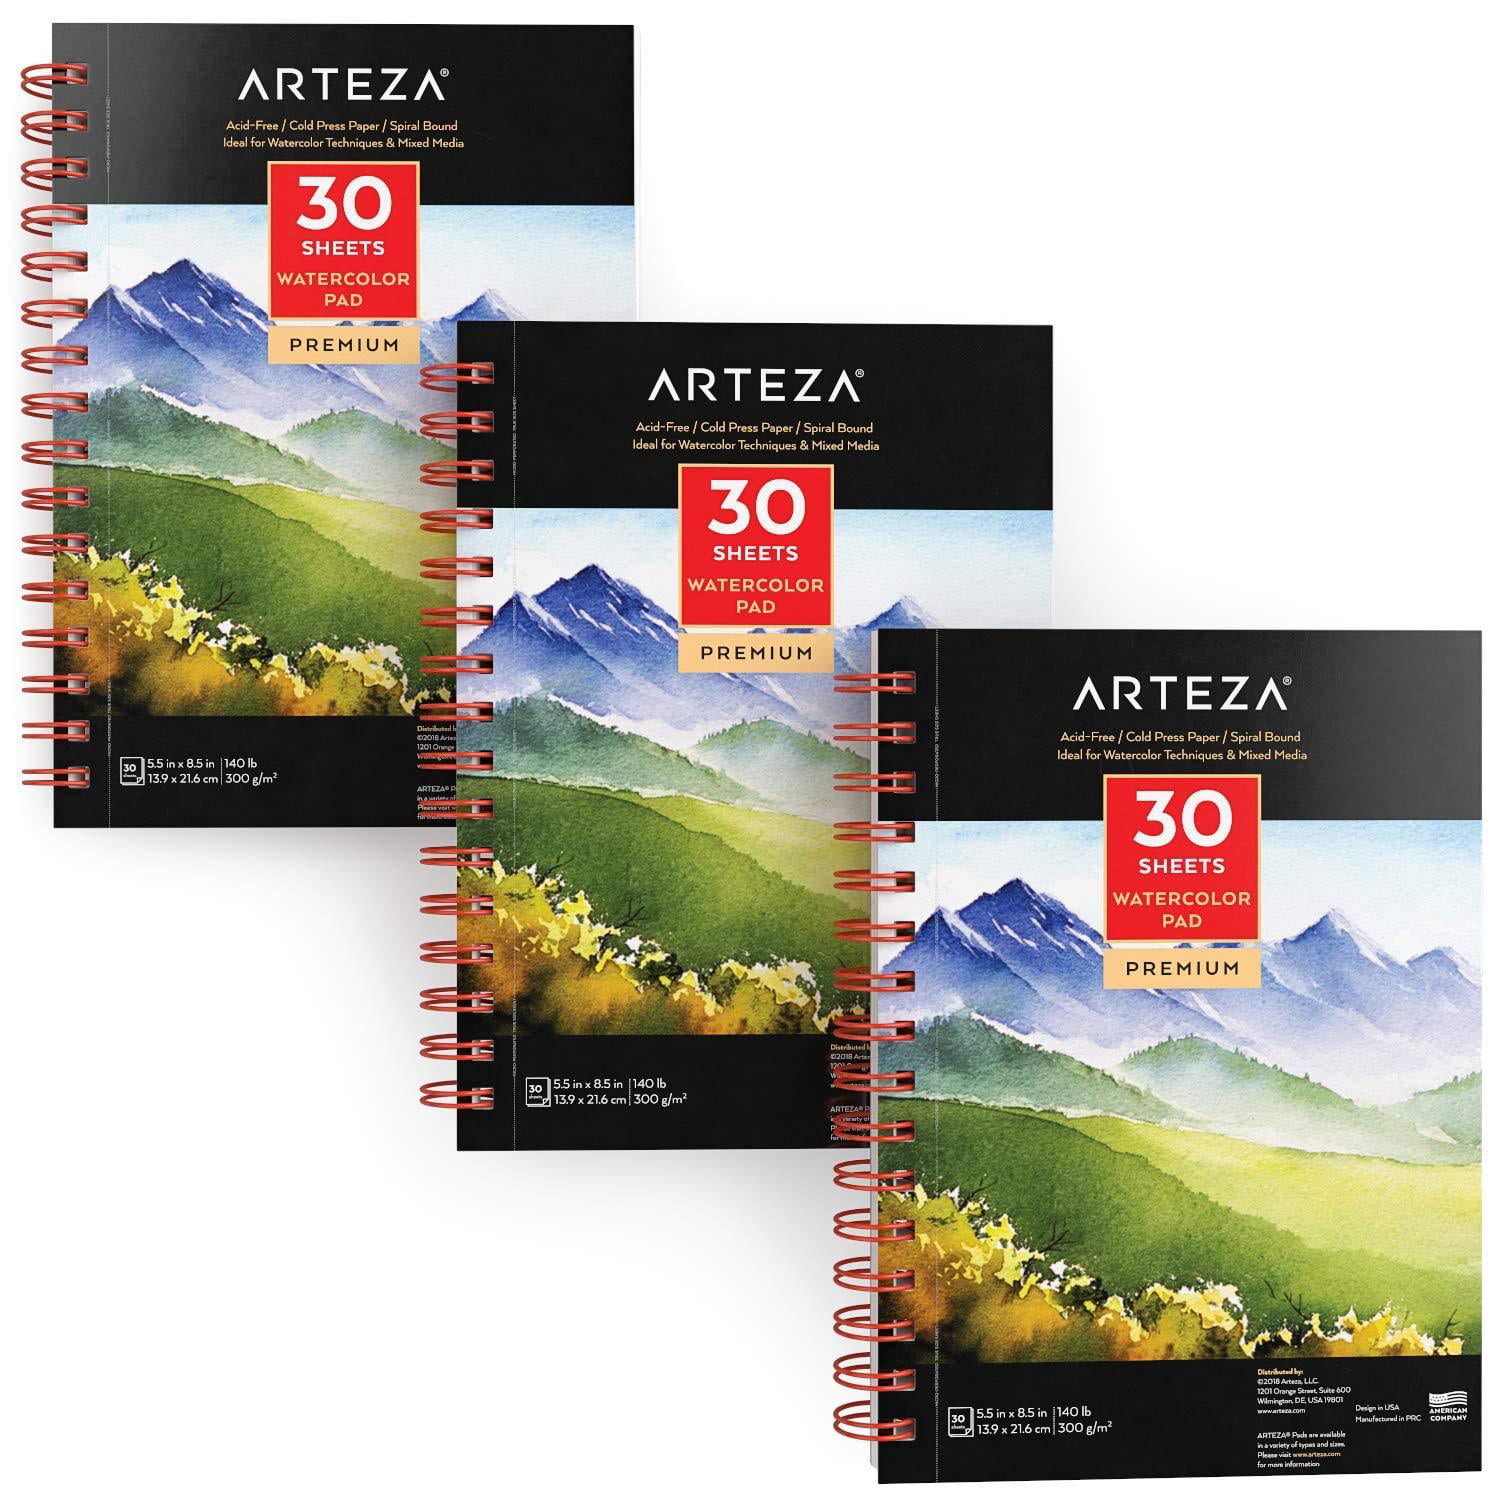 Spiral Bound Acid Free Perfect for Wet 30 Sheets Each 3 Pack 140lb/300gsm Cold Pressed Paper Arteza 5.5X8.5 Watercolour Pad 90 Sheets Dry & Mixed Media Painting 